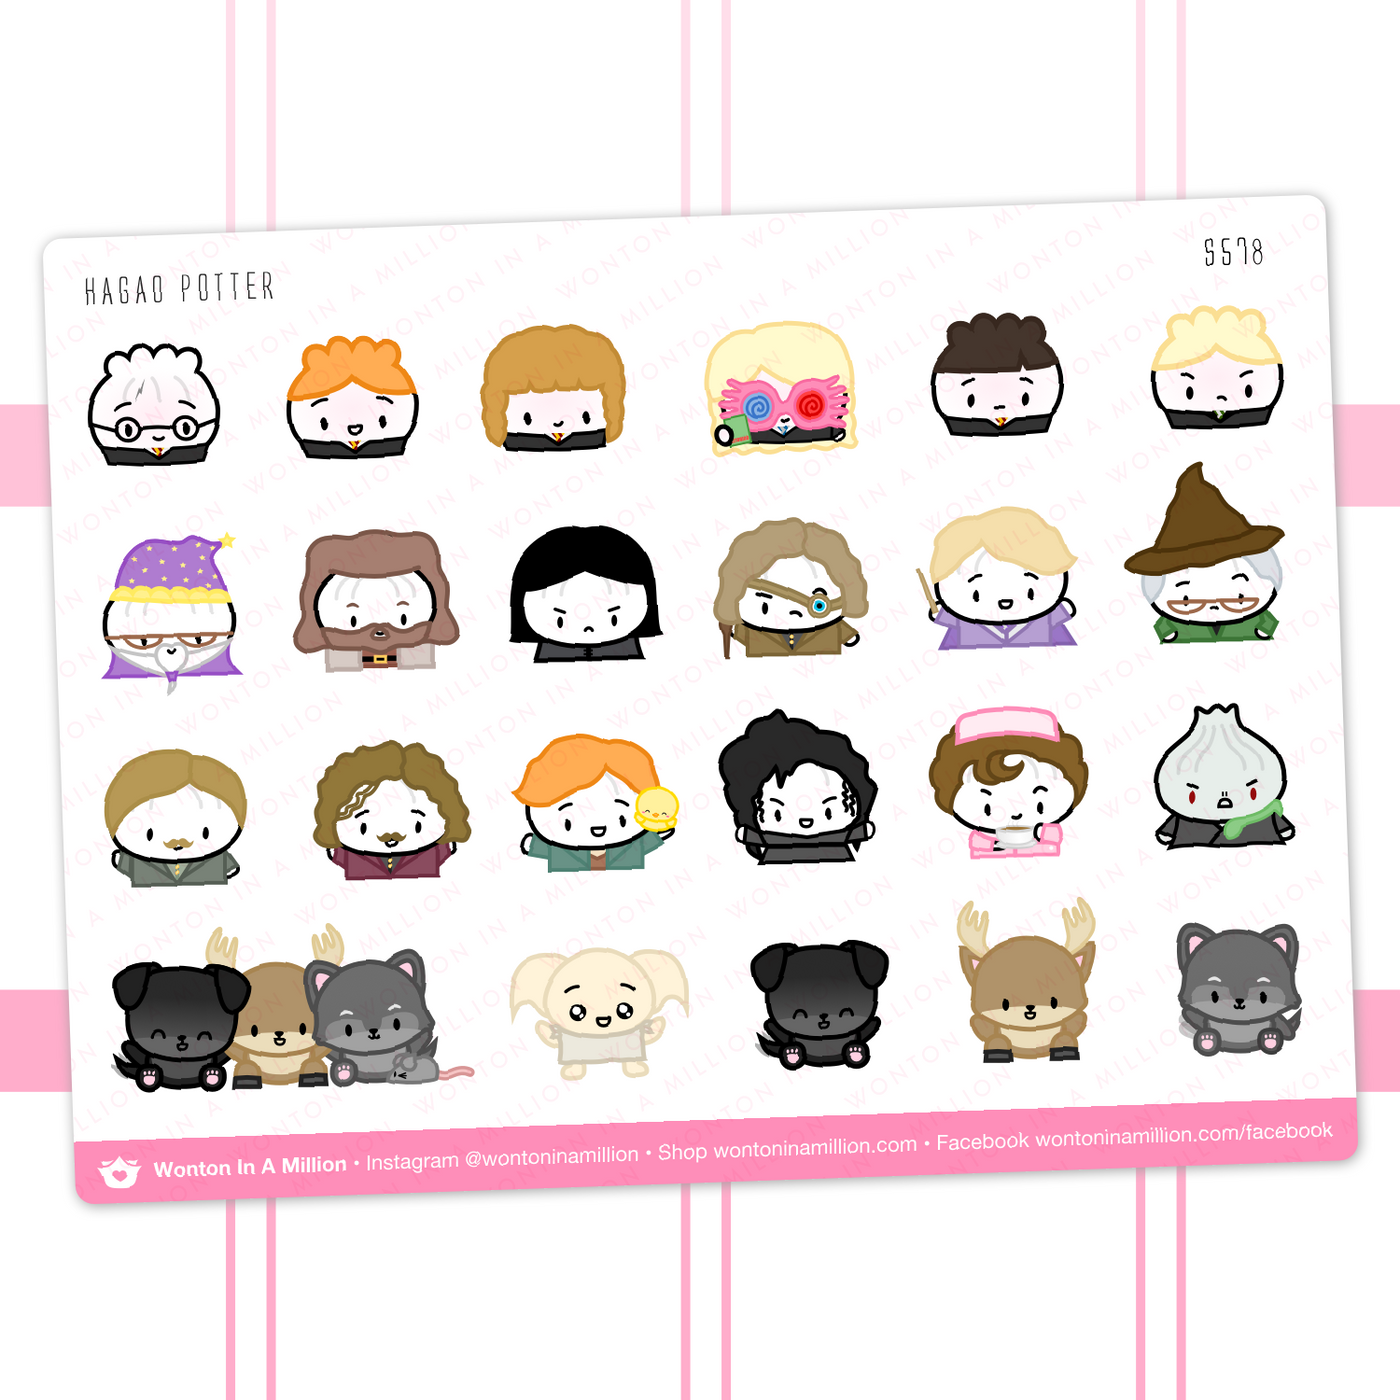 Hagao Potter - All The Characters Stickers